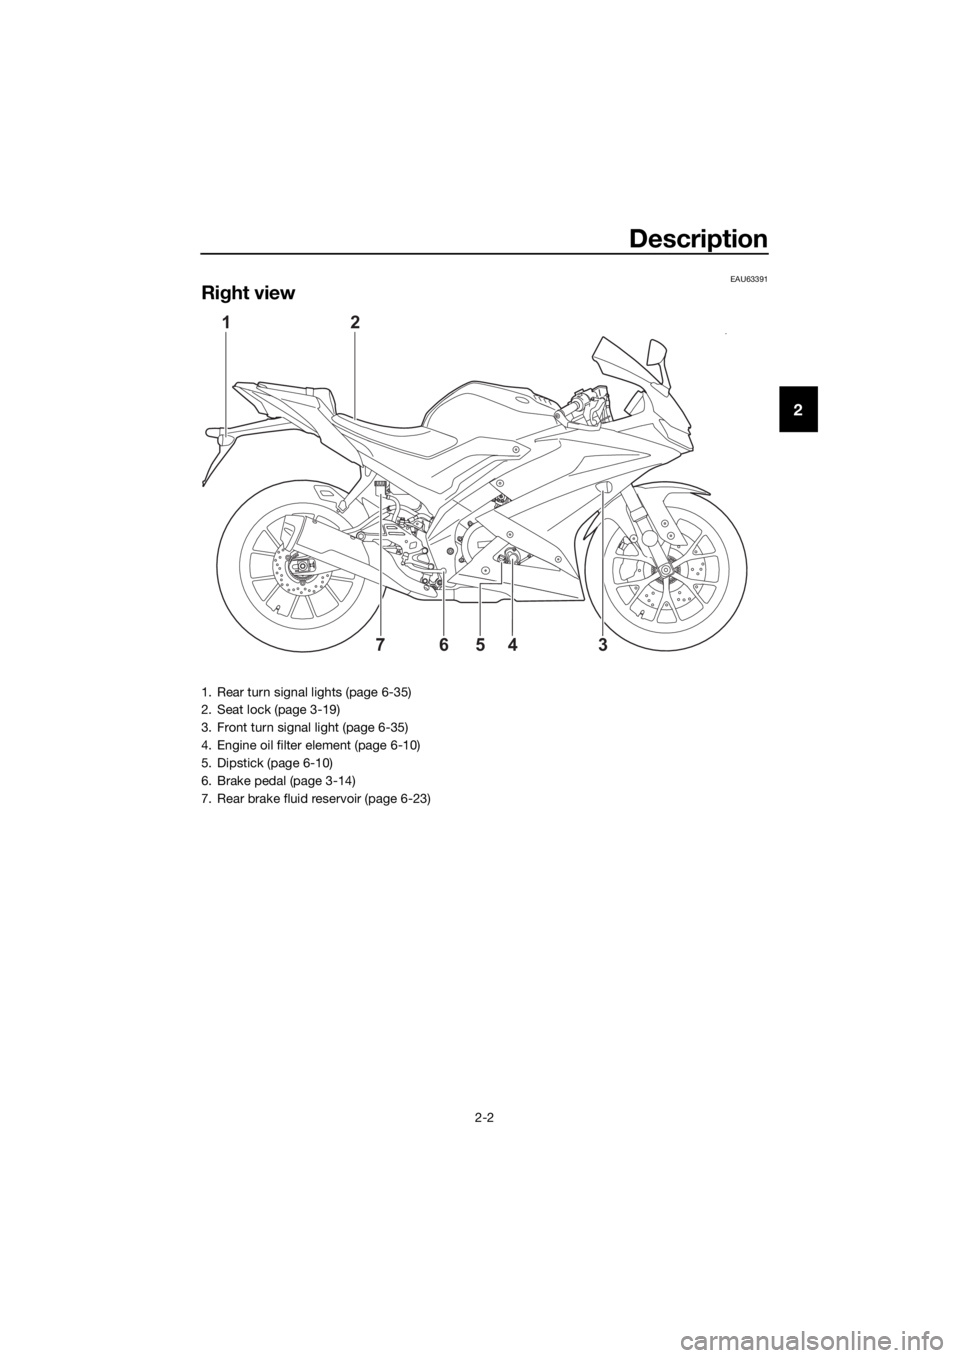 YAMAHA YZF-R125 2020  Owners Manual Description
2-2
2
EAU63391
Right view
21
4 76
35
1. Rear turn signal lights (page 6-35)
2. Seat lock (page 3-19)
3. Front turn signal light (page 6-35)
4. Engine oil filter element (page 6-10)
5. Dips